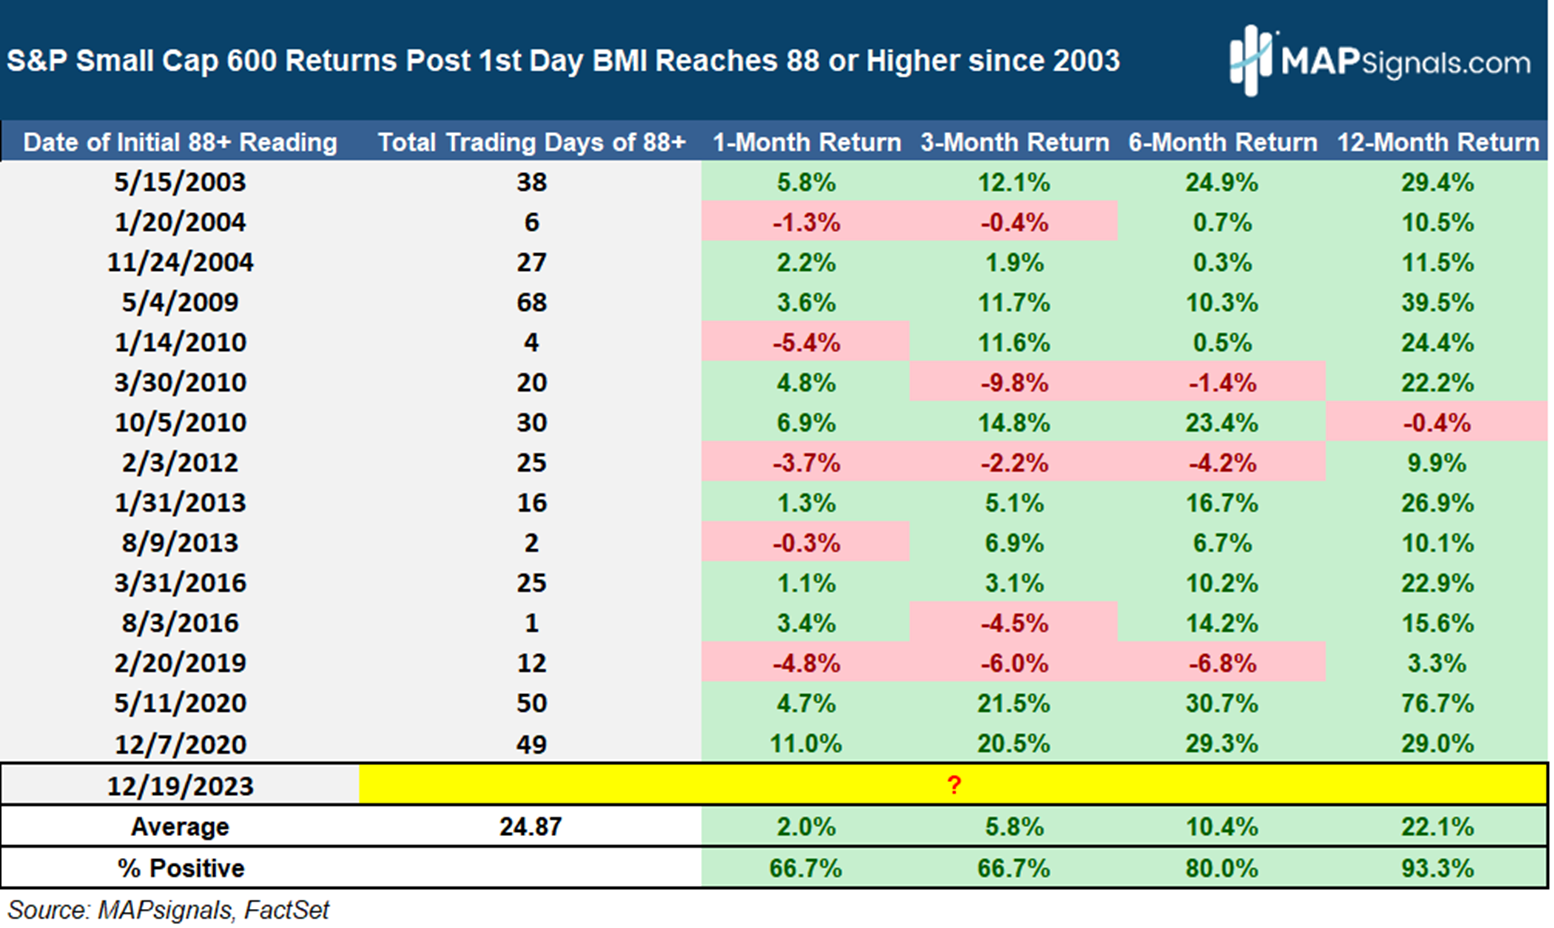 S & P 600 Returns post 1st day BMI reaches 88+ since 2003 | MAPsignals